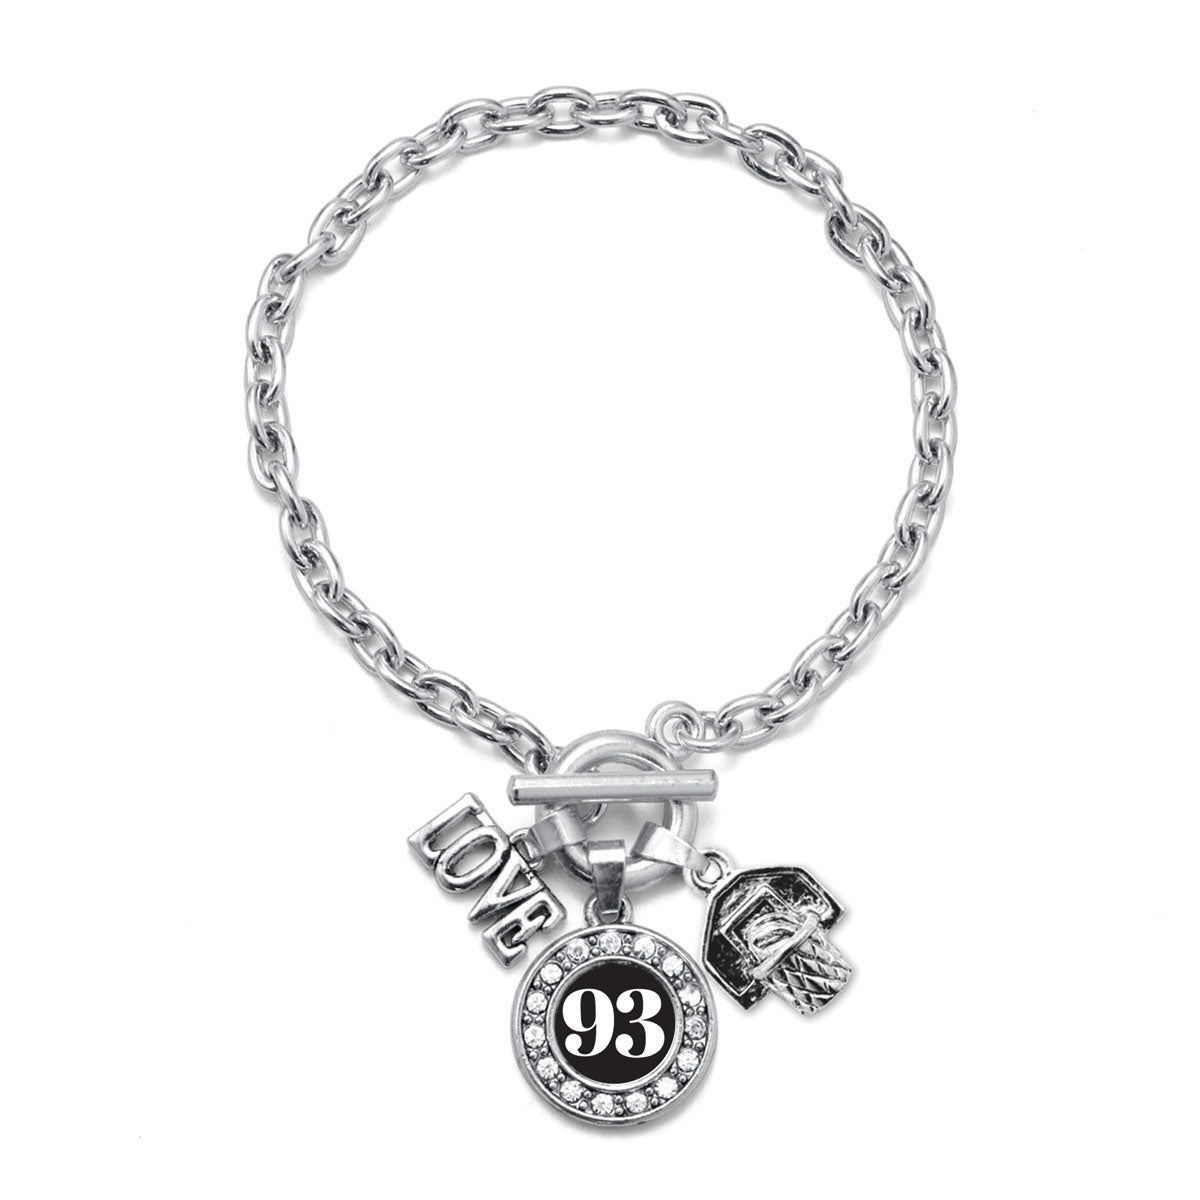 Silver Basketball Hoop - Sports Number 93 Circle Charm Toggle Bracelet